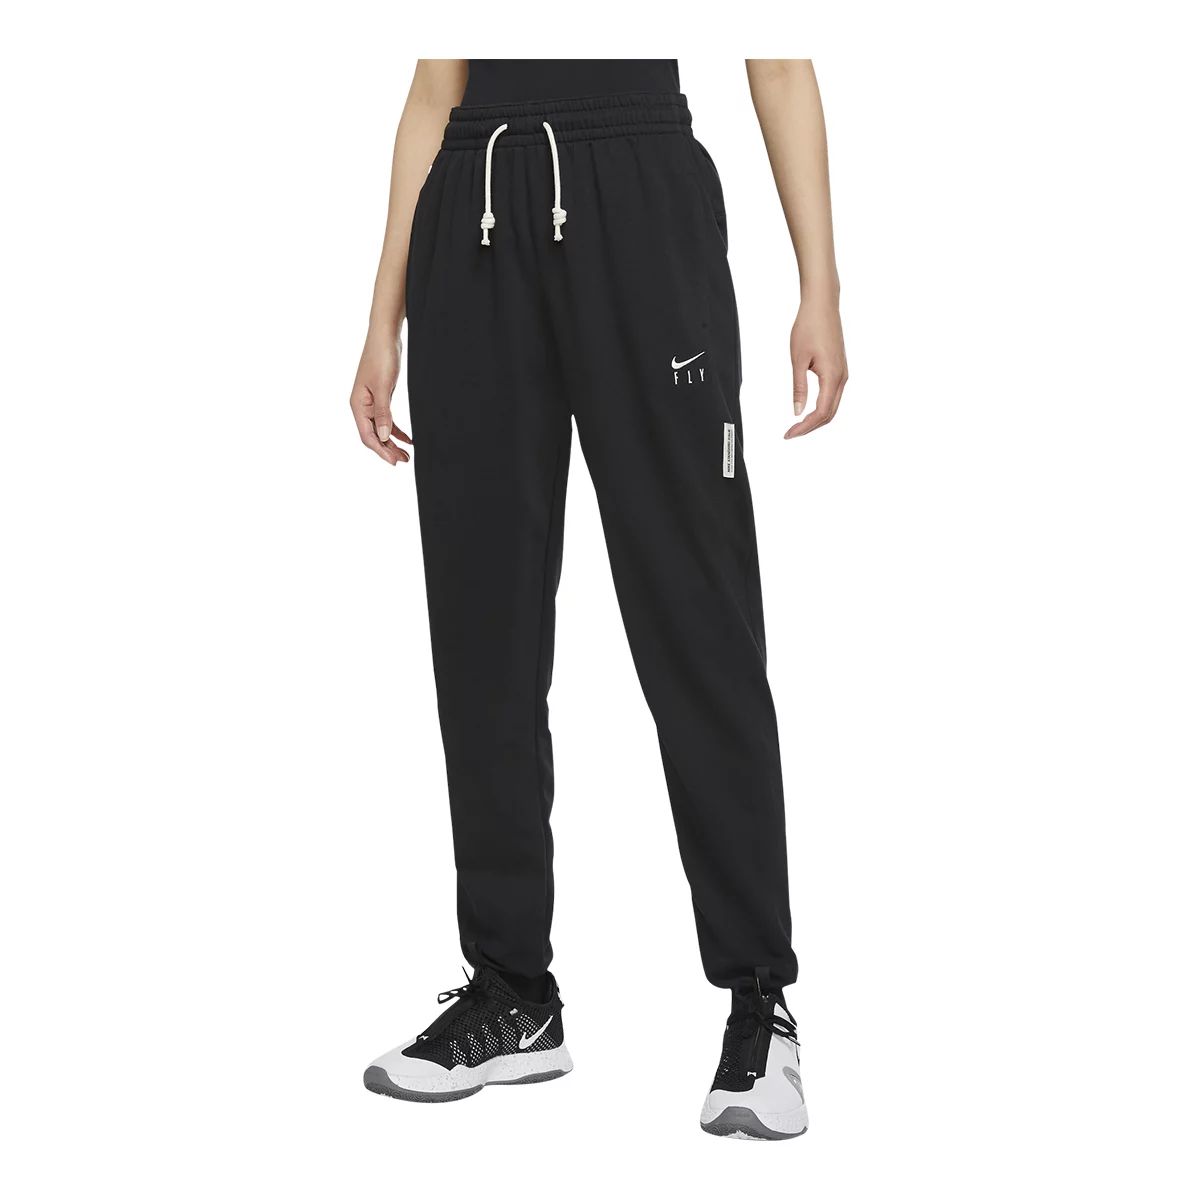 Nike Women's Basketball Standard Issue Dri-Fit Pants Training Loose Fit